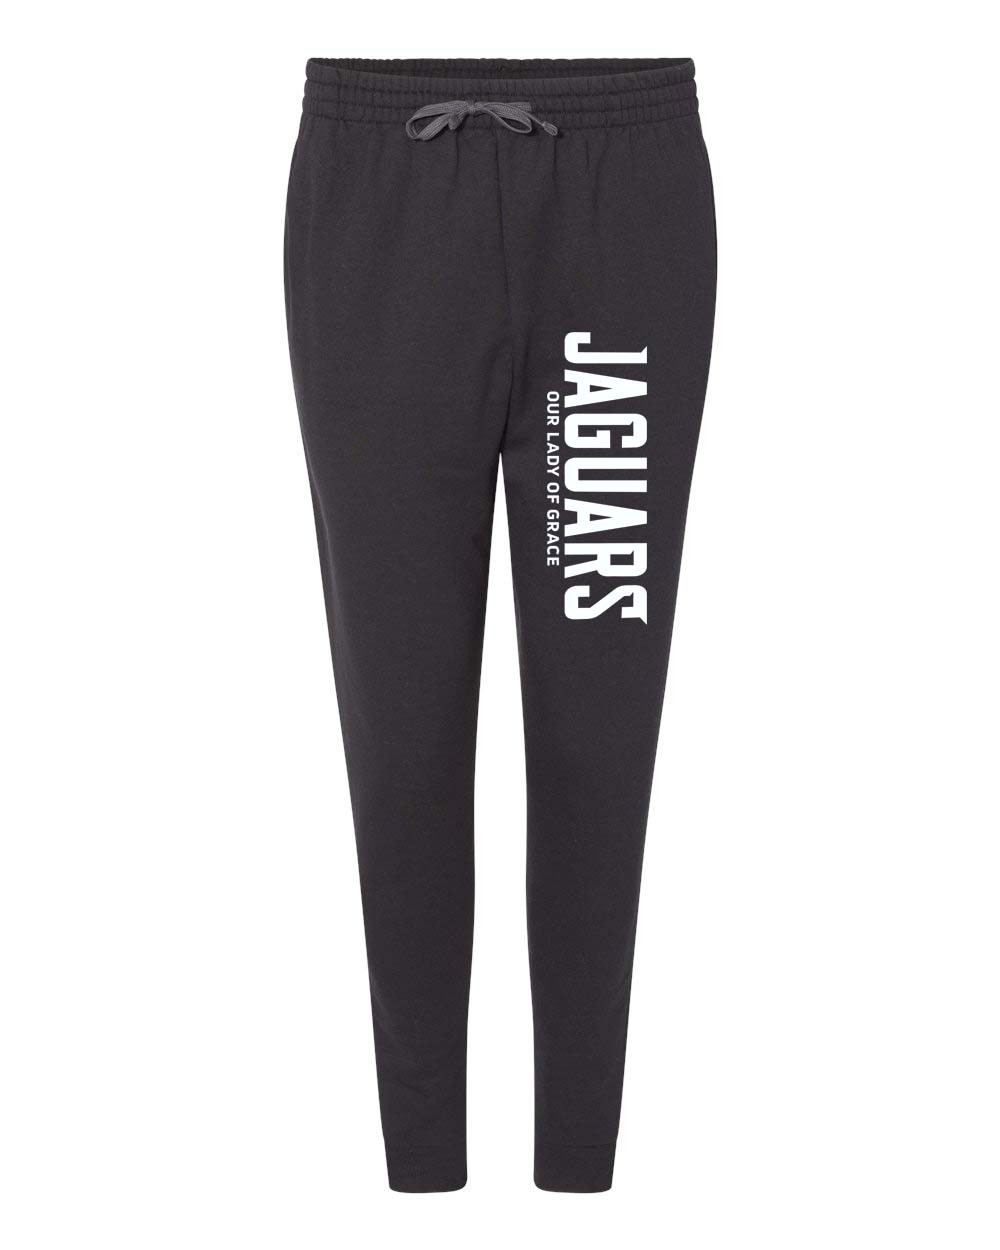 OLG Spirit Joggers w/ White Logo - Please Allow 2-3 Weeks for Delivery ...